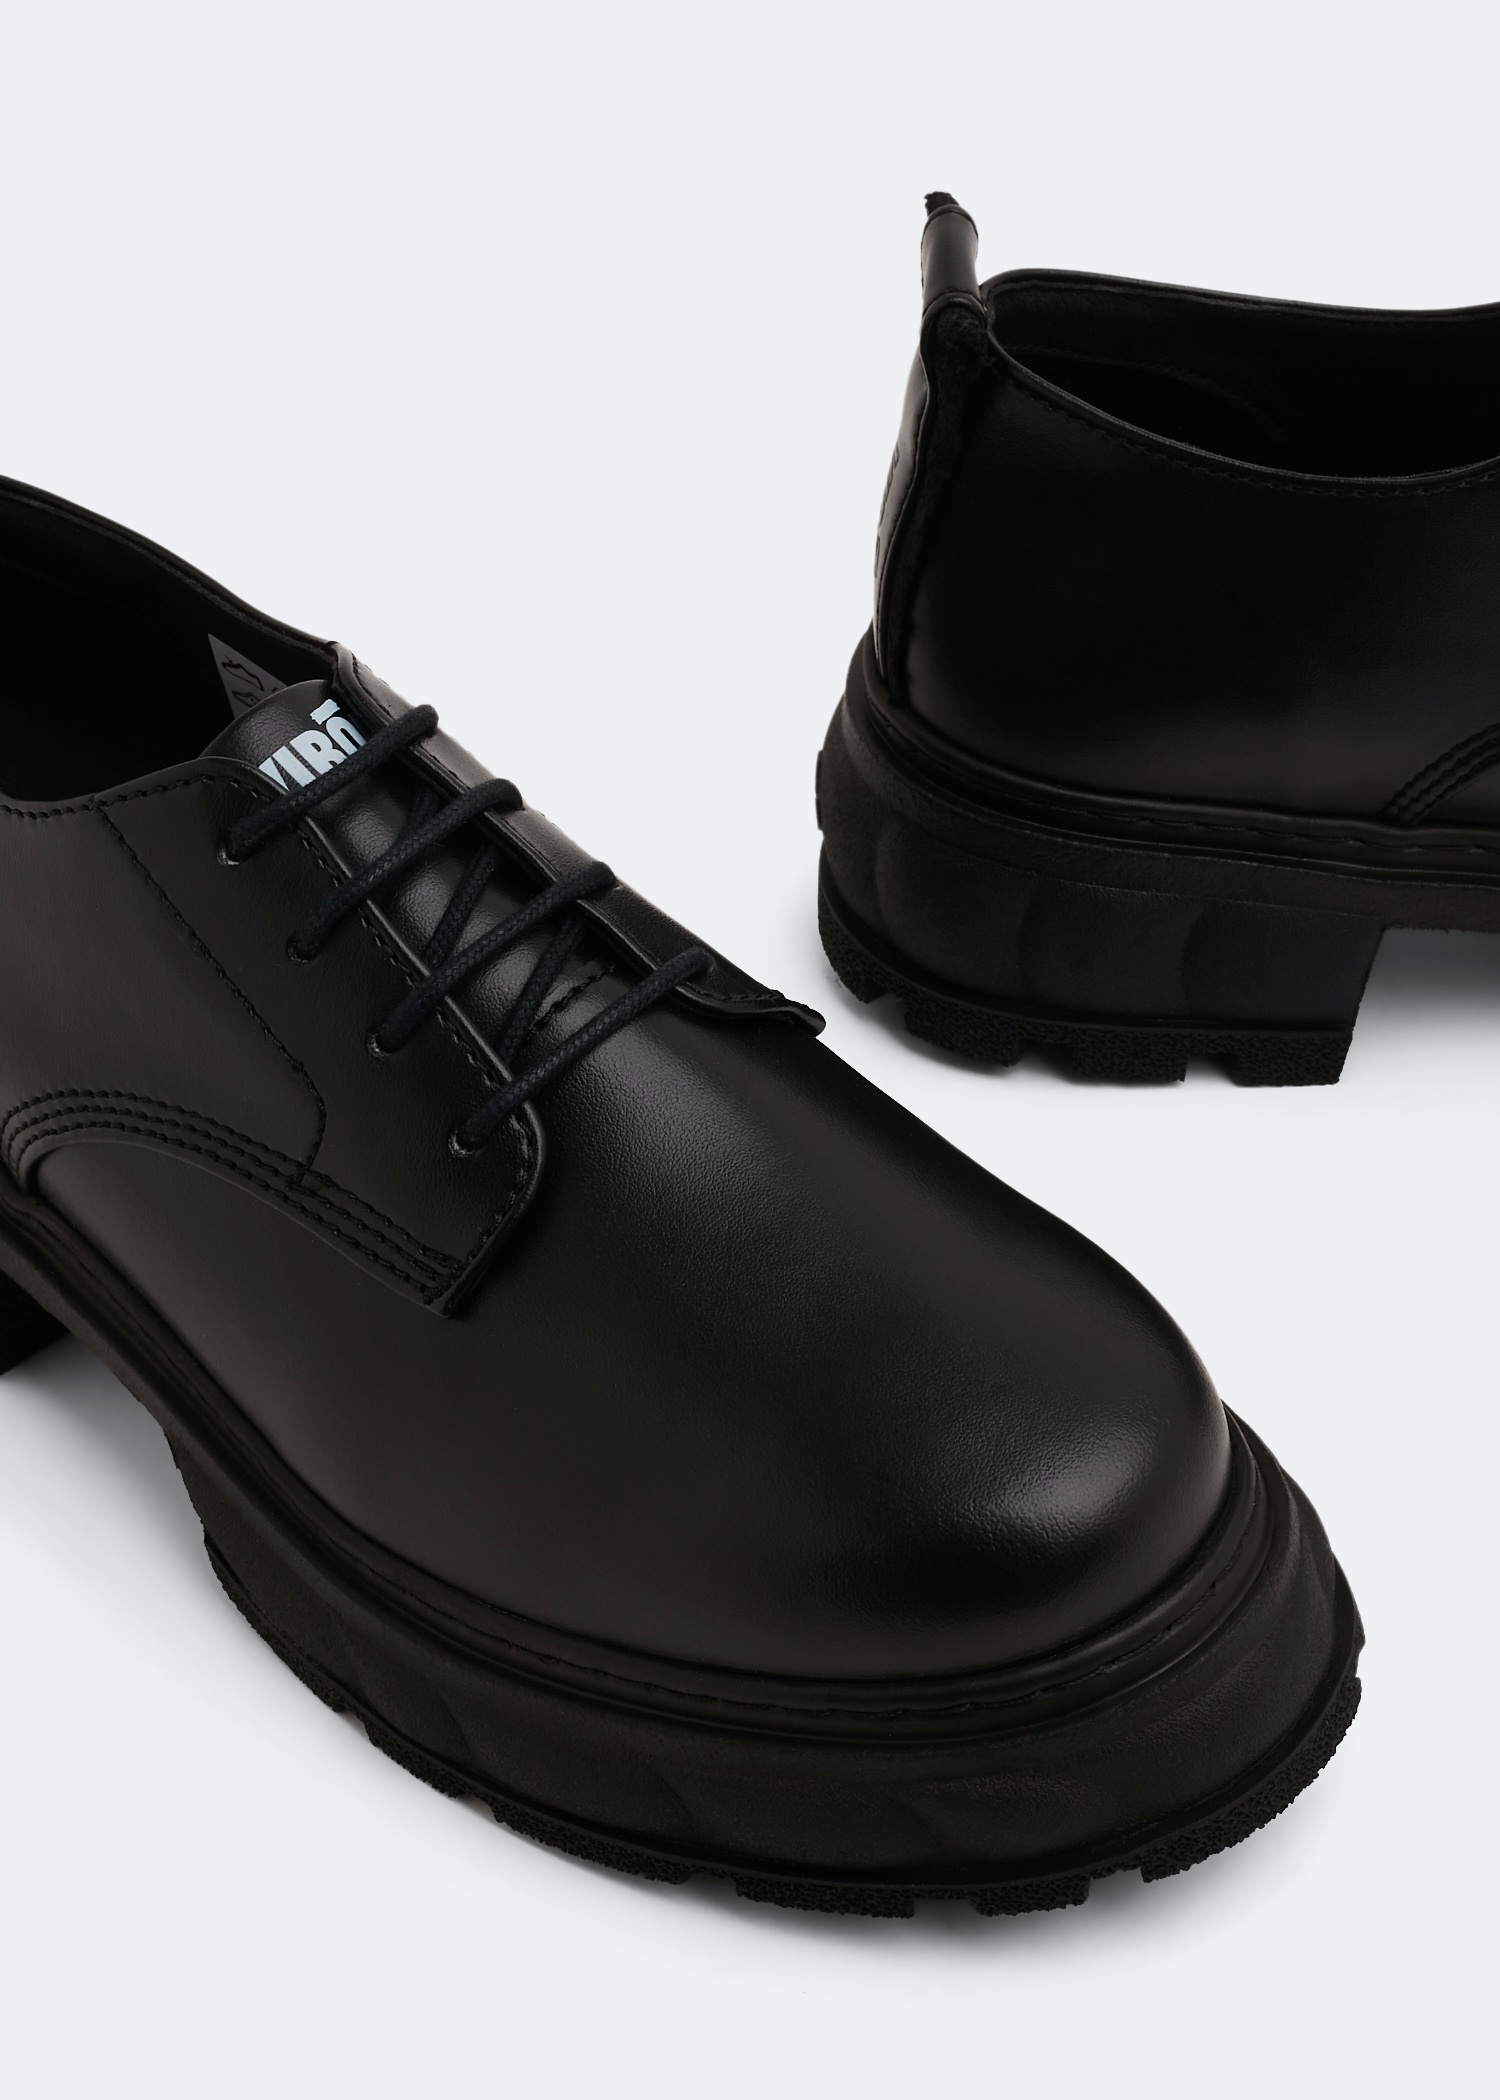 Viron Alter Oxford shoes for Men - Black in UAE | Level Shoes